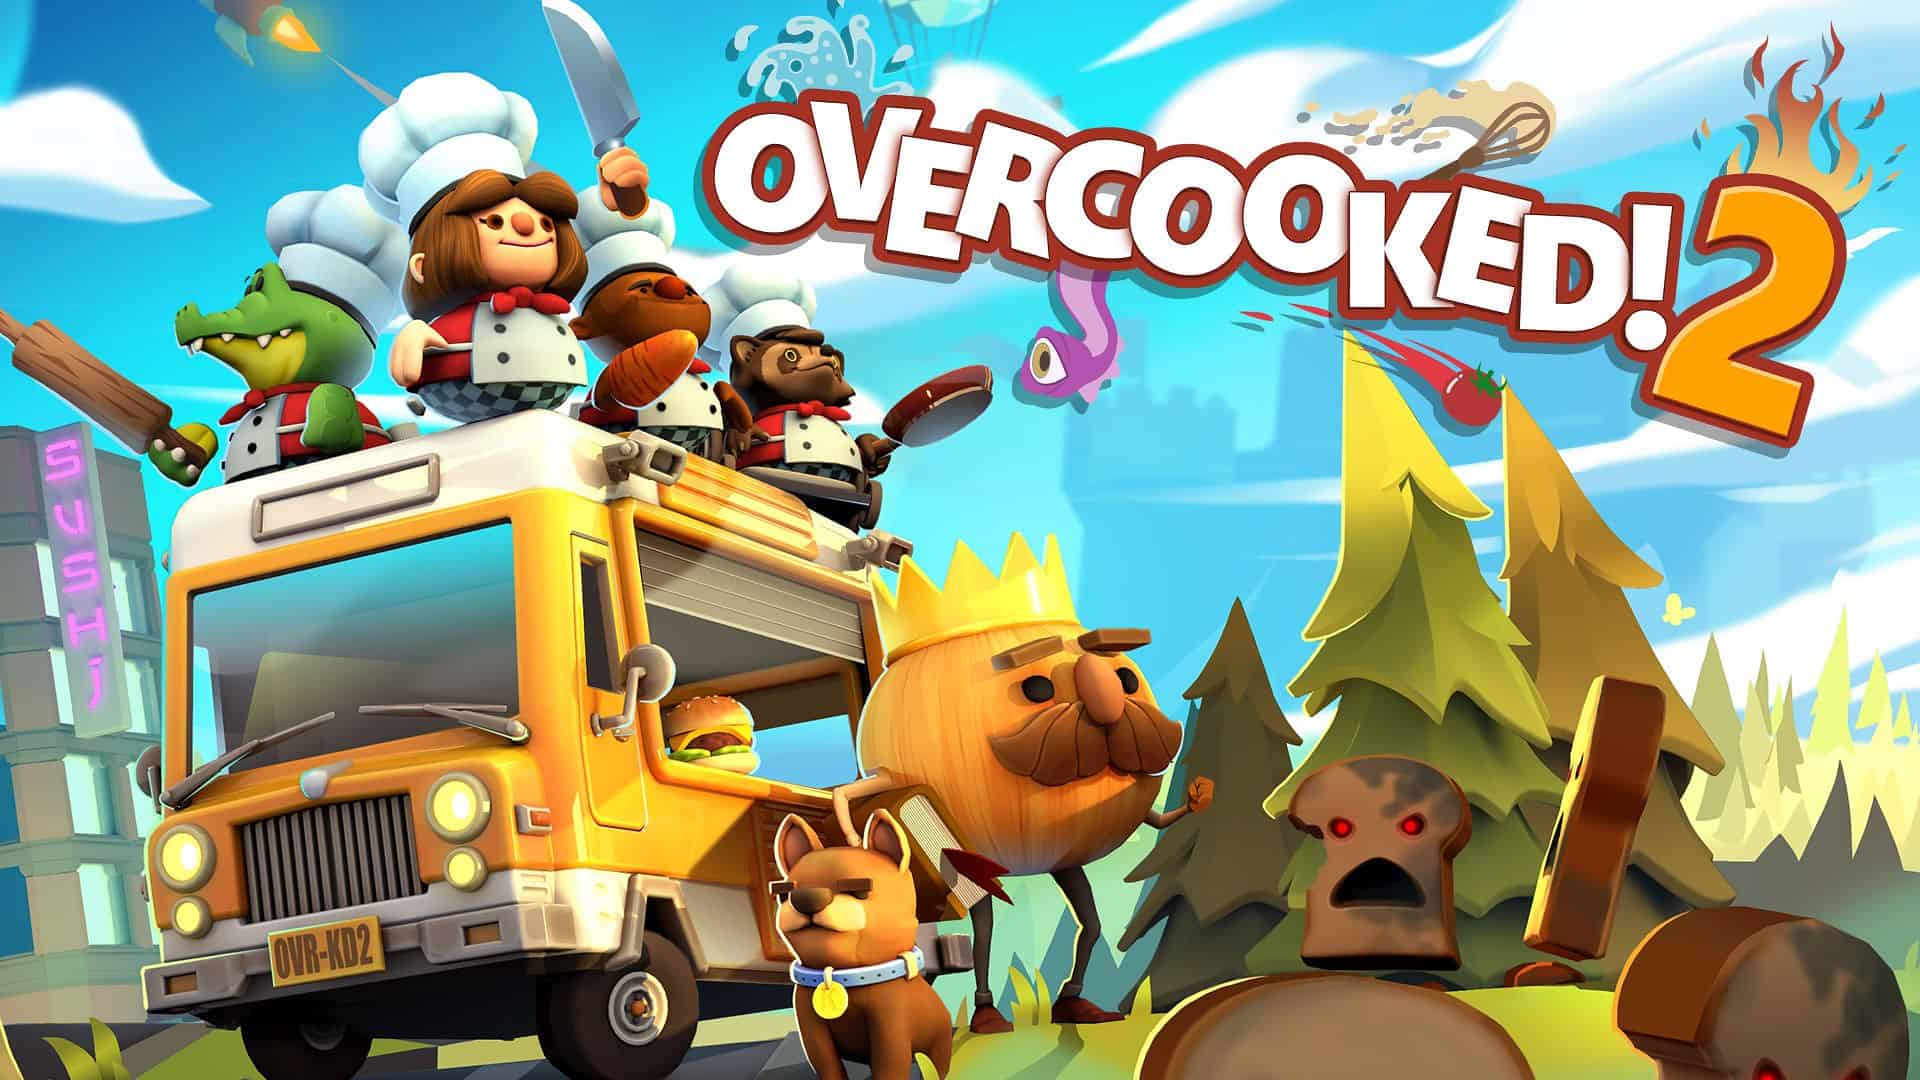 How much internet data does Overcooked 2 use